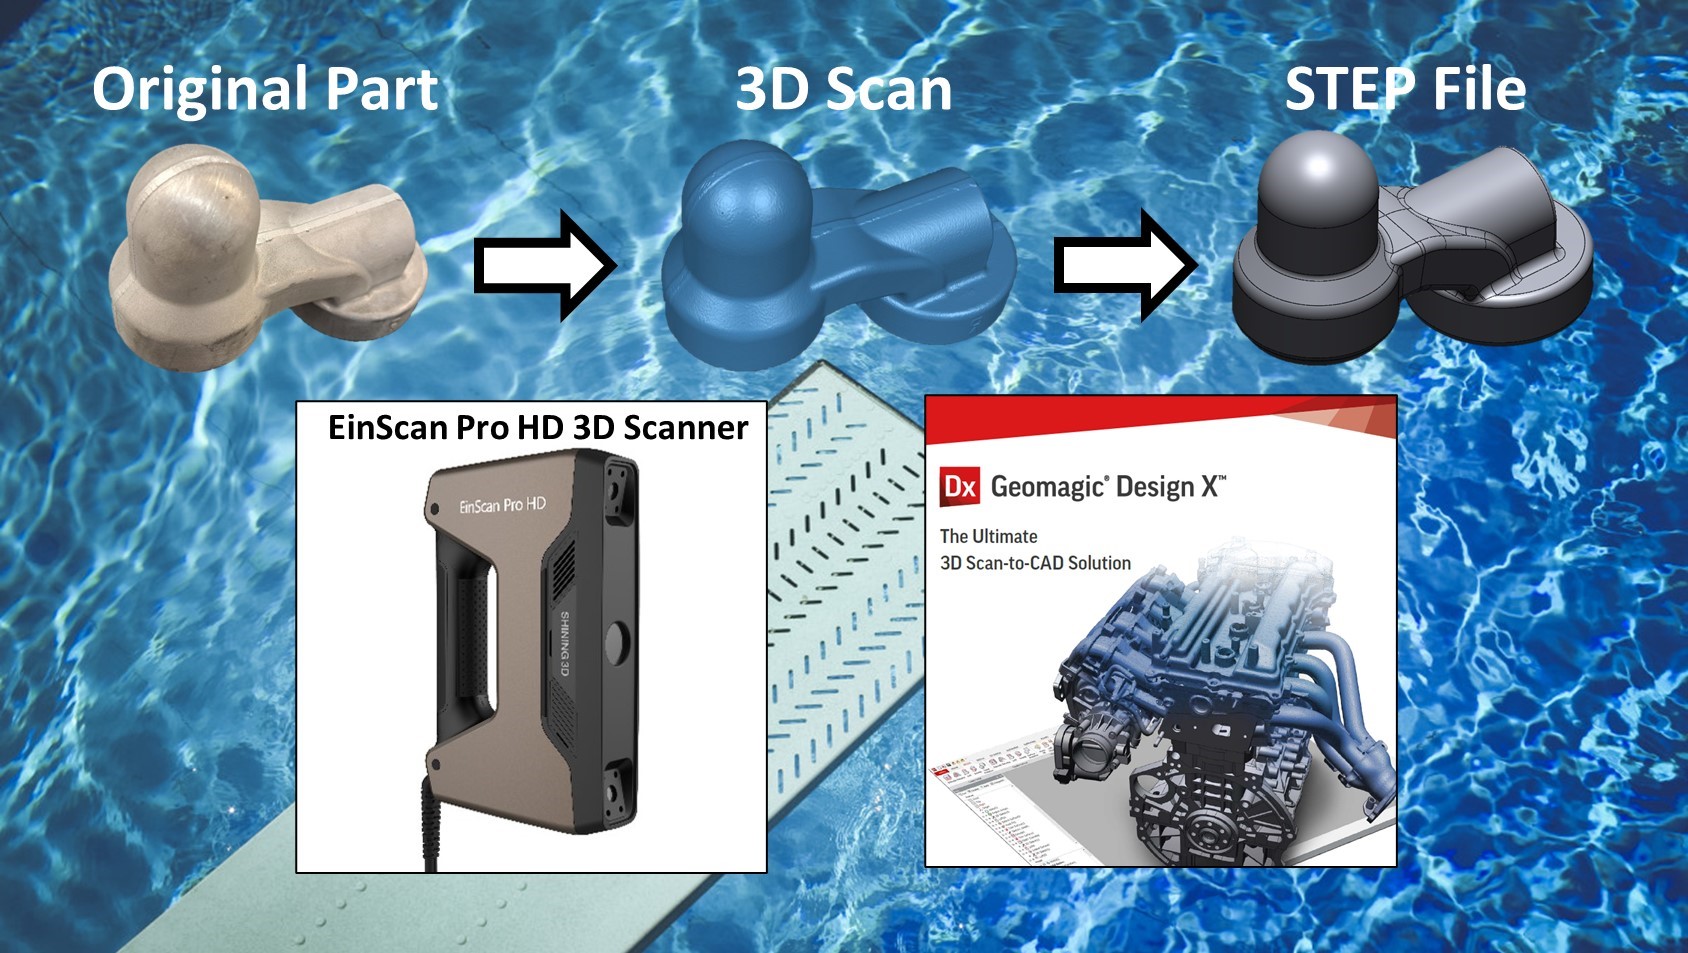 Info graphic of the reverse engineering process using an EinScan Pro HD 3D scanner and Geomagic Essentials software.